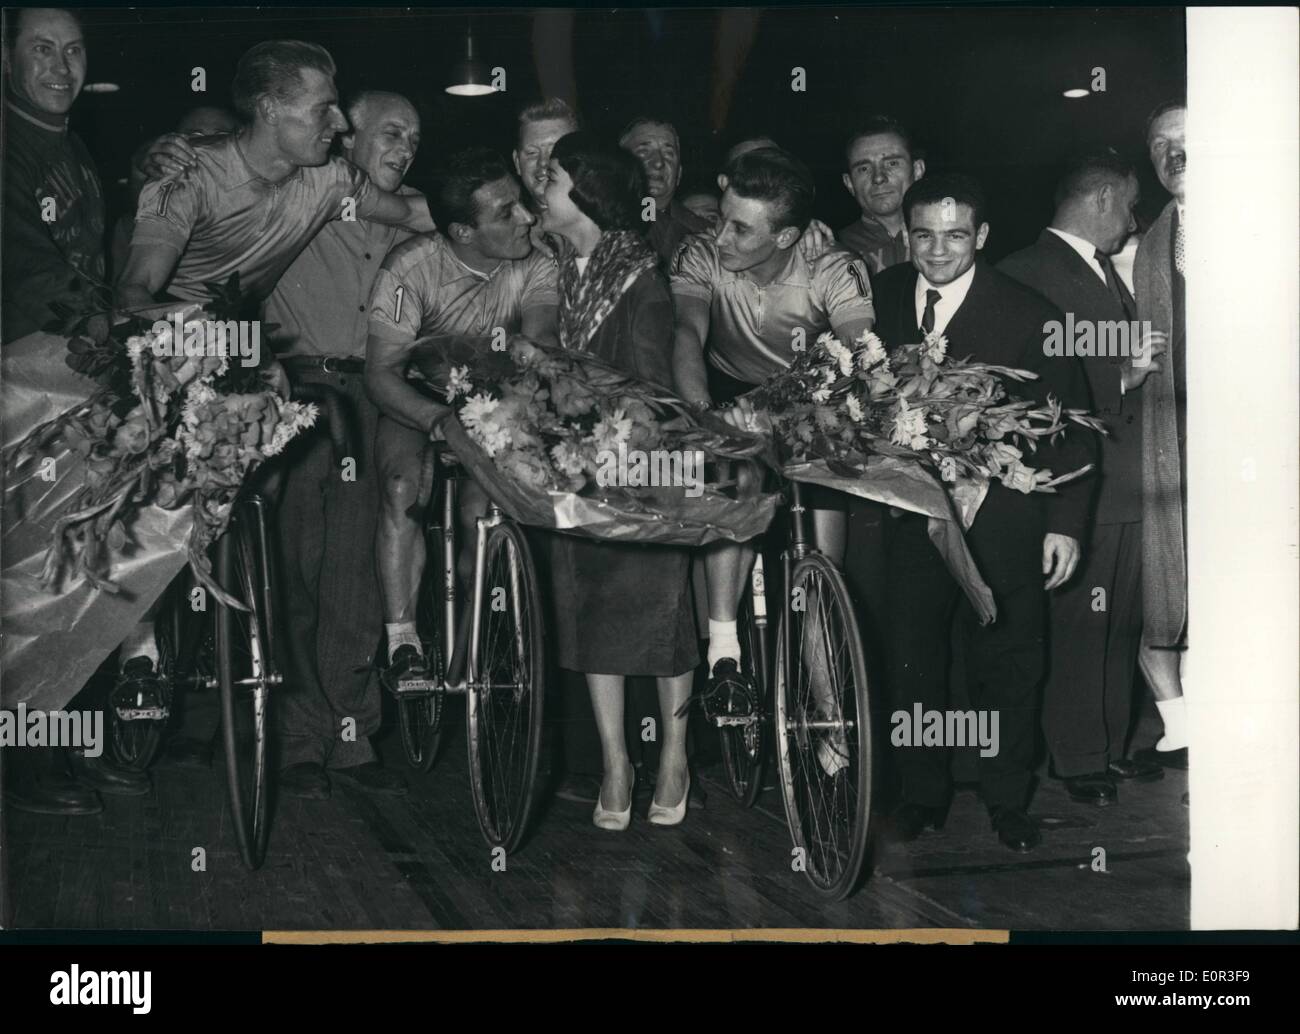 Nov. 11, 1957 - Anquetil And His Tow Team-Mates Win Paris Six Day Bicycle Race. The six day bicycle race which finished at Velodromed' Hiver was won by Jacques Anquetil and his two team mates, the Frenchman Darrigade and the Italian Terruzzi. From left to right: Darrgade, Terruzzi (kissing the queen of the six days, Annie Fratellini) and Jacques Anquetil. Stock Photo